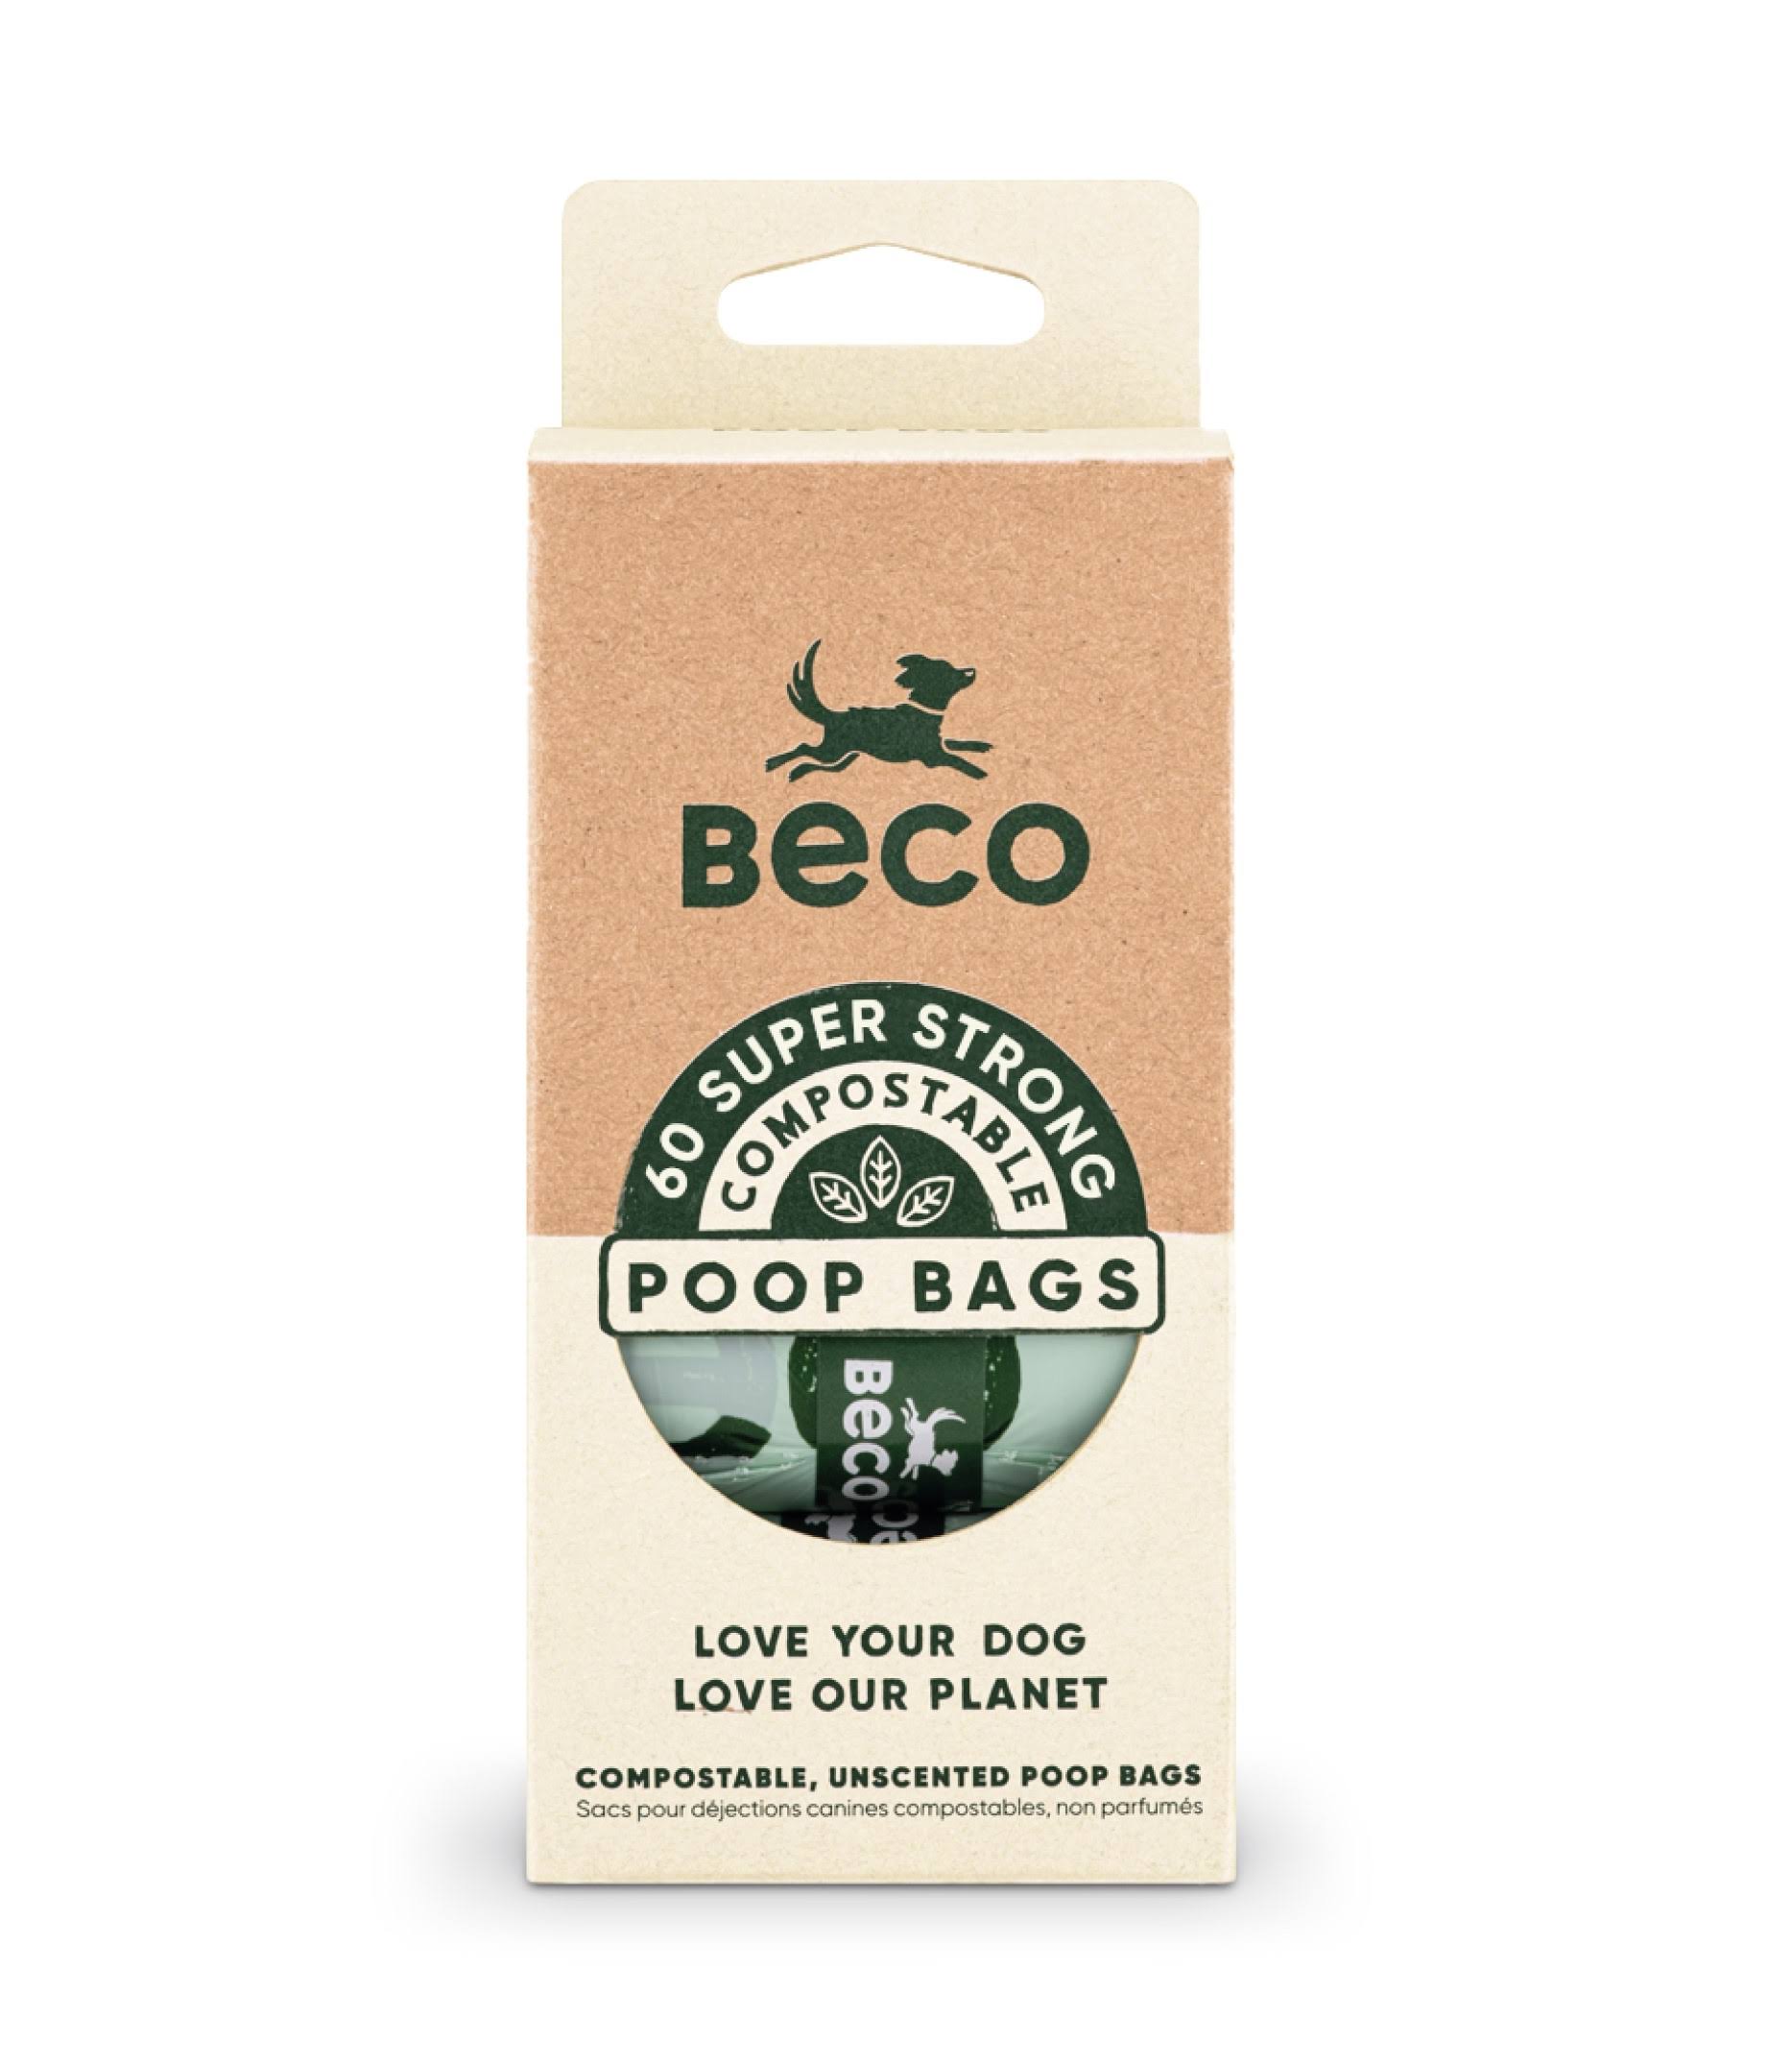 Beco Compostable Poop Bags - 60ct